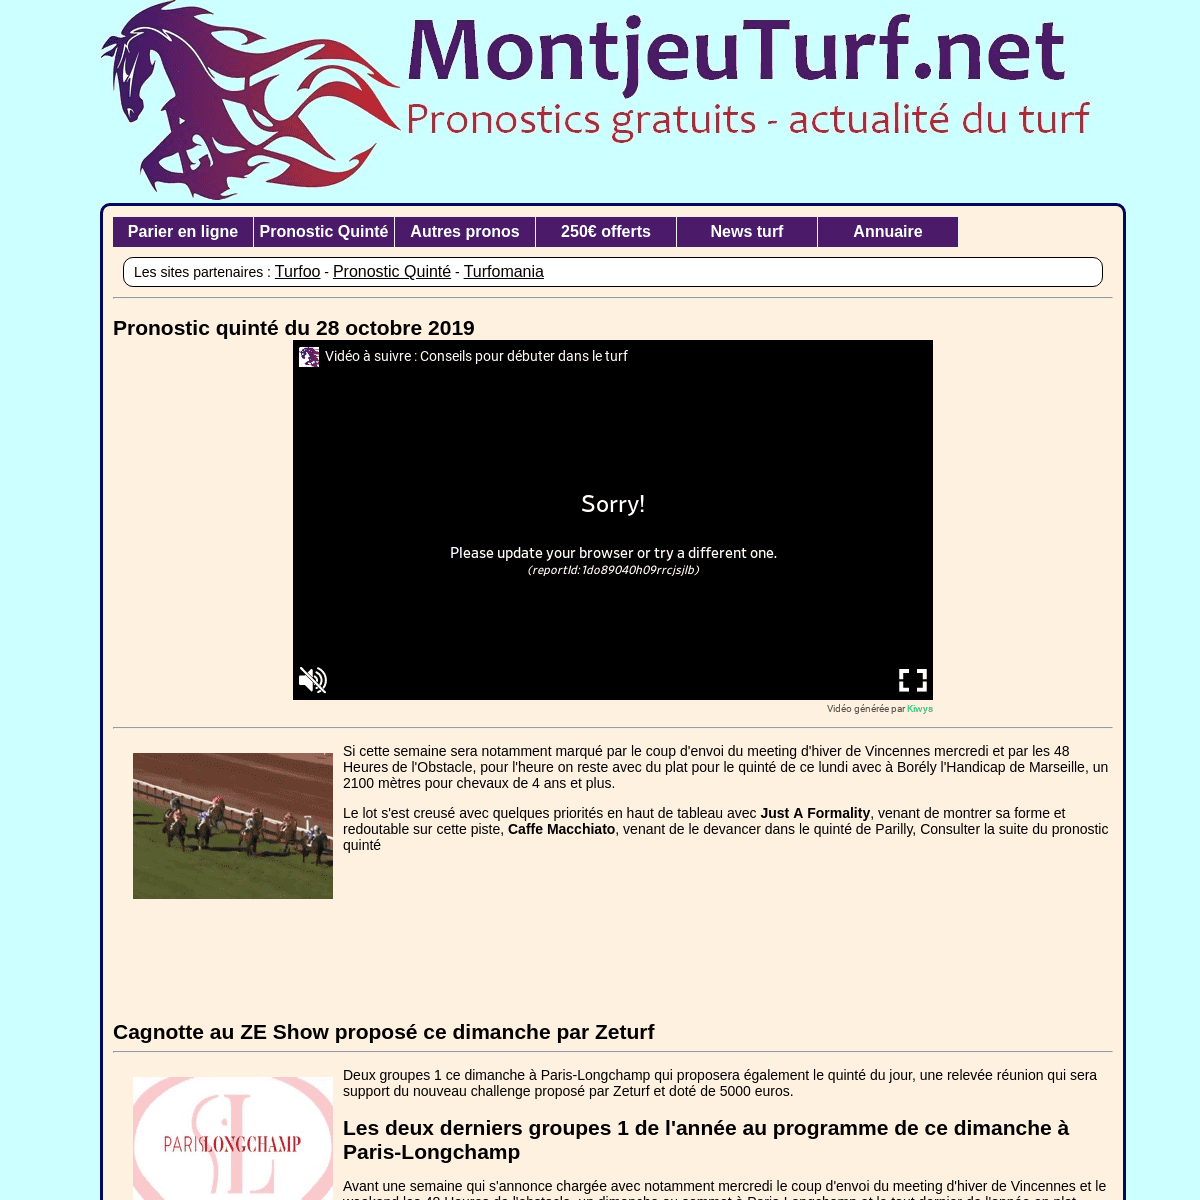 A complete backup of montjeuturf.net